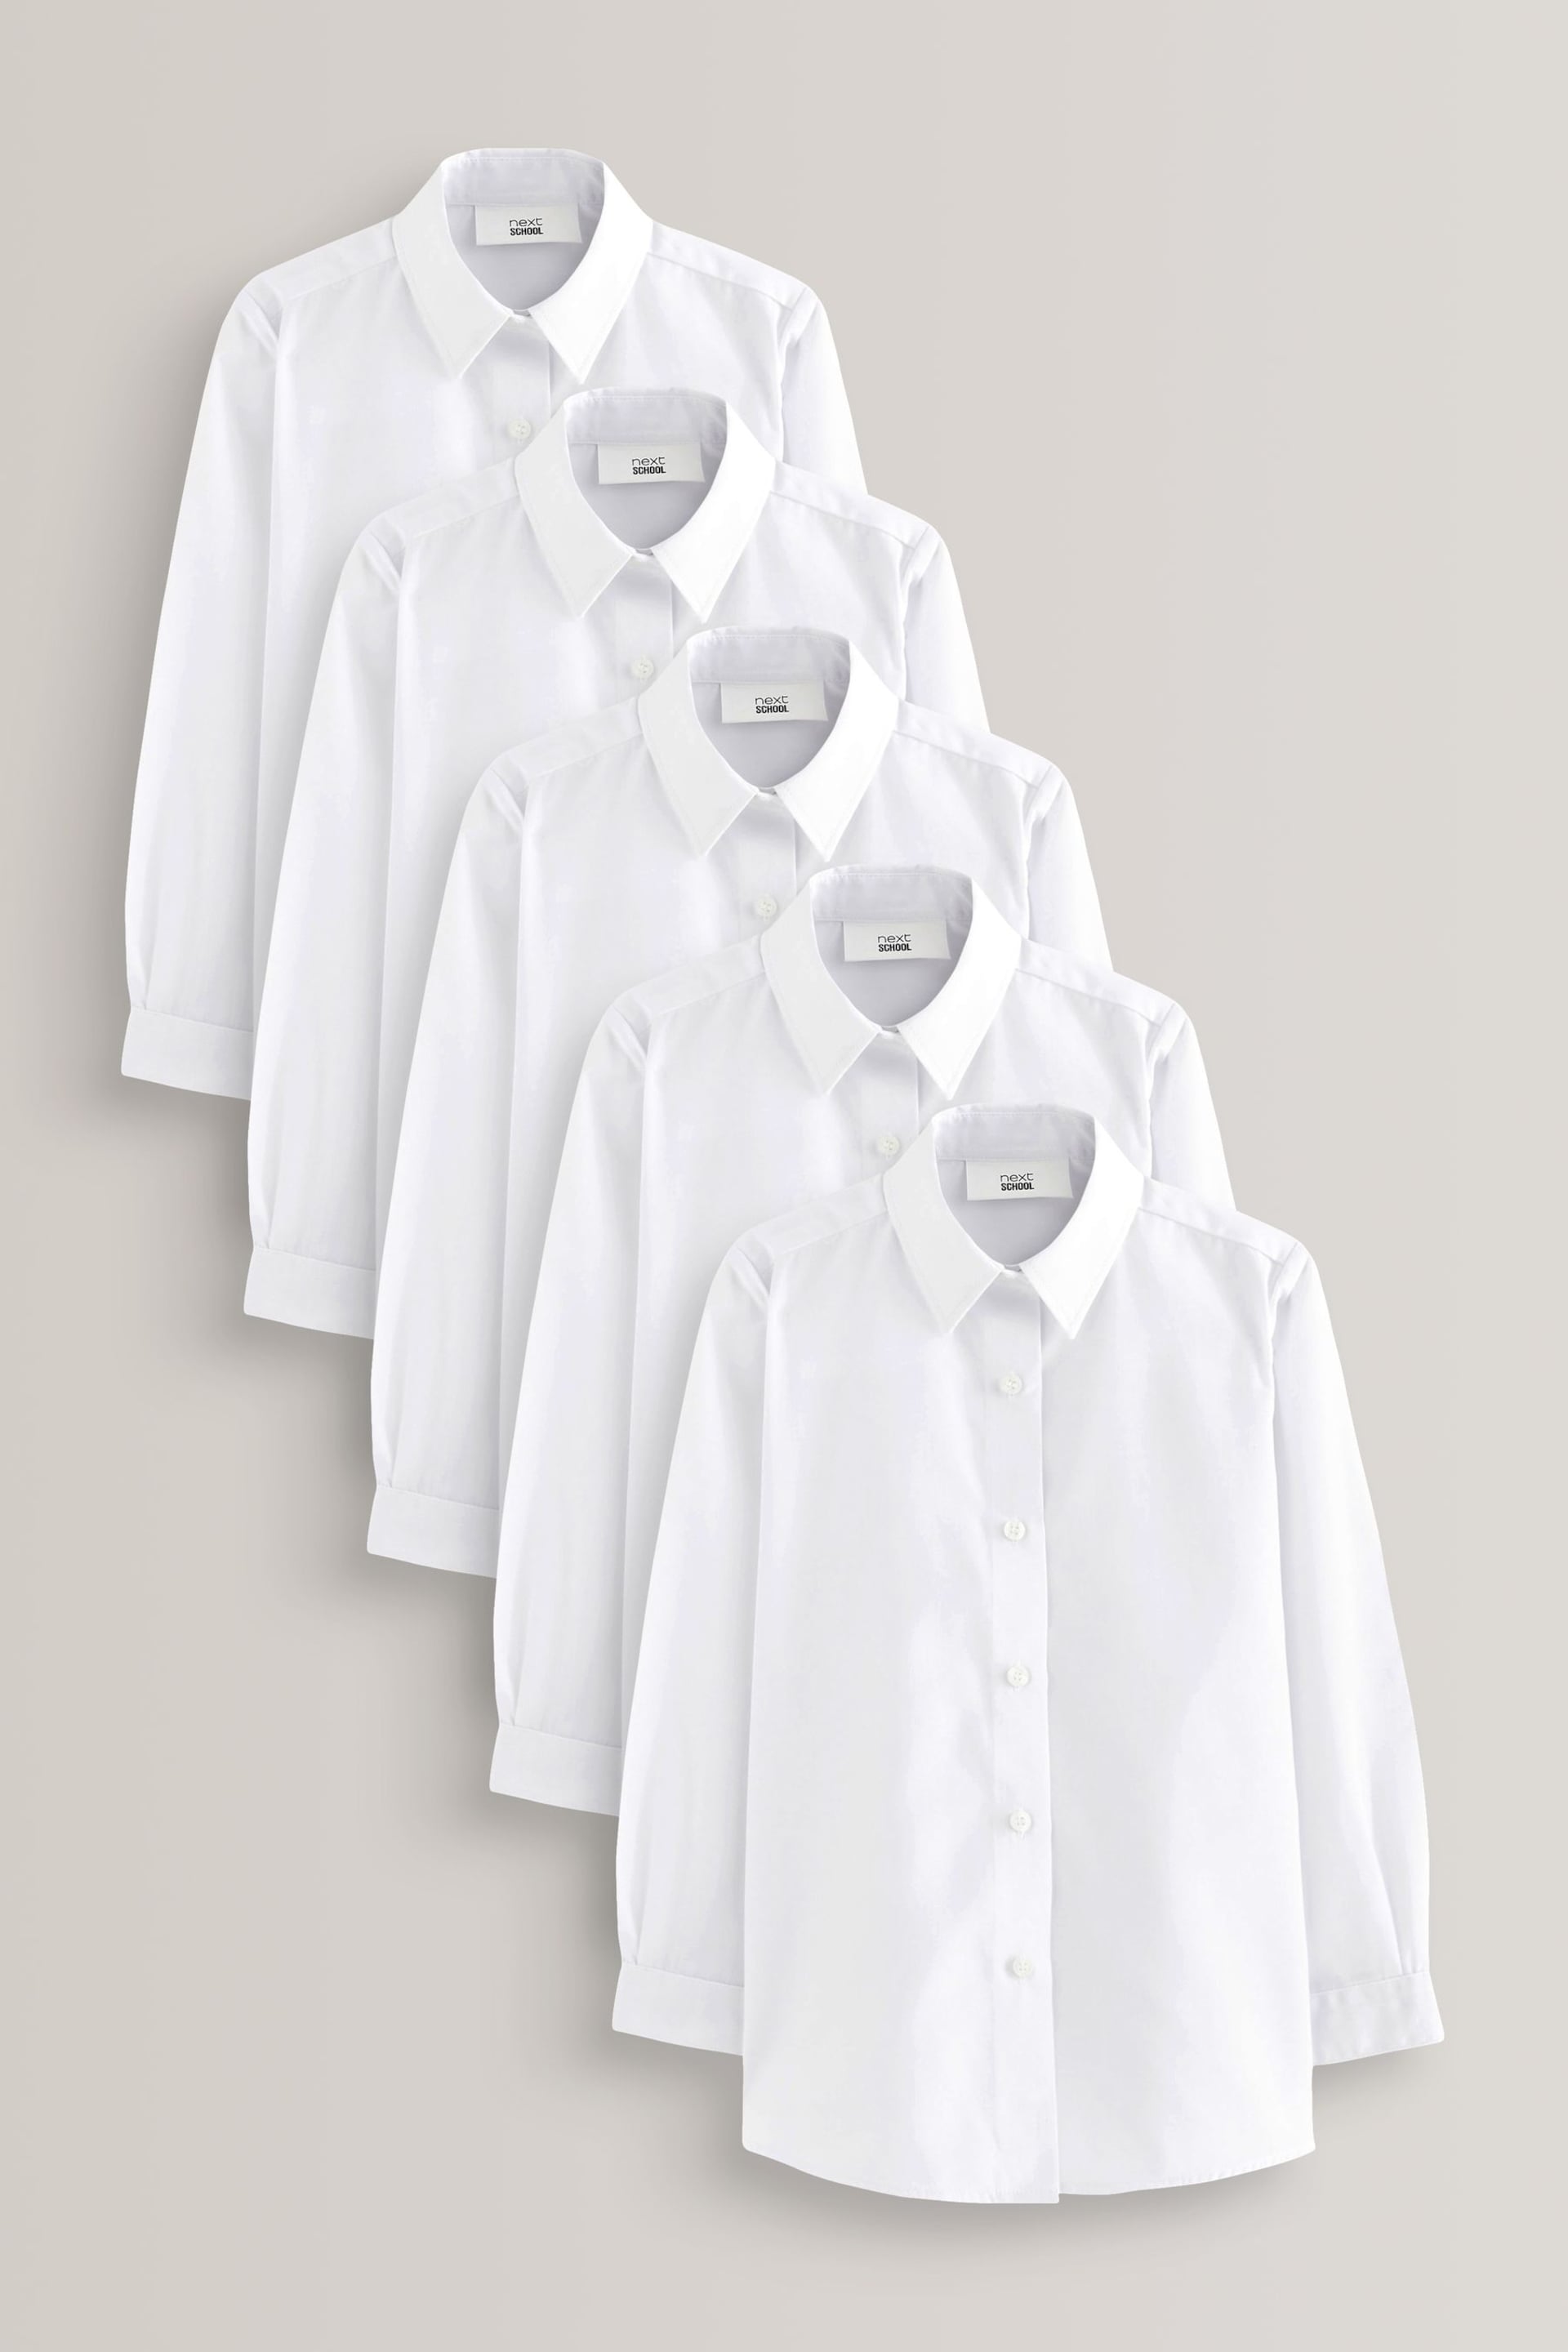 White Regular Fit 5 Pack Long Sleeve Formal School Shirts (3-18yrs) - Image 1 of 6